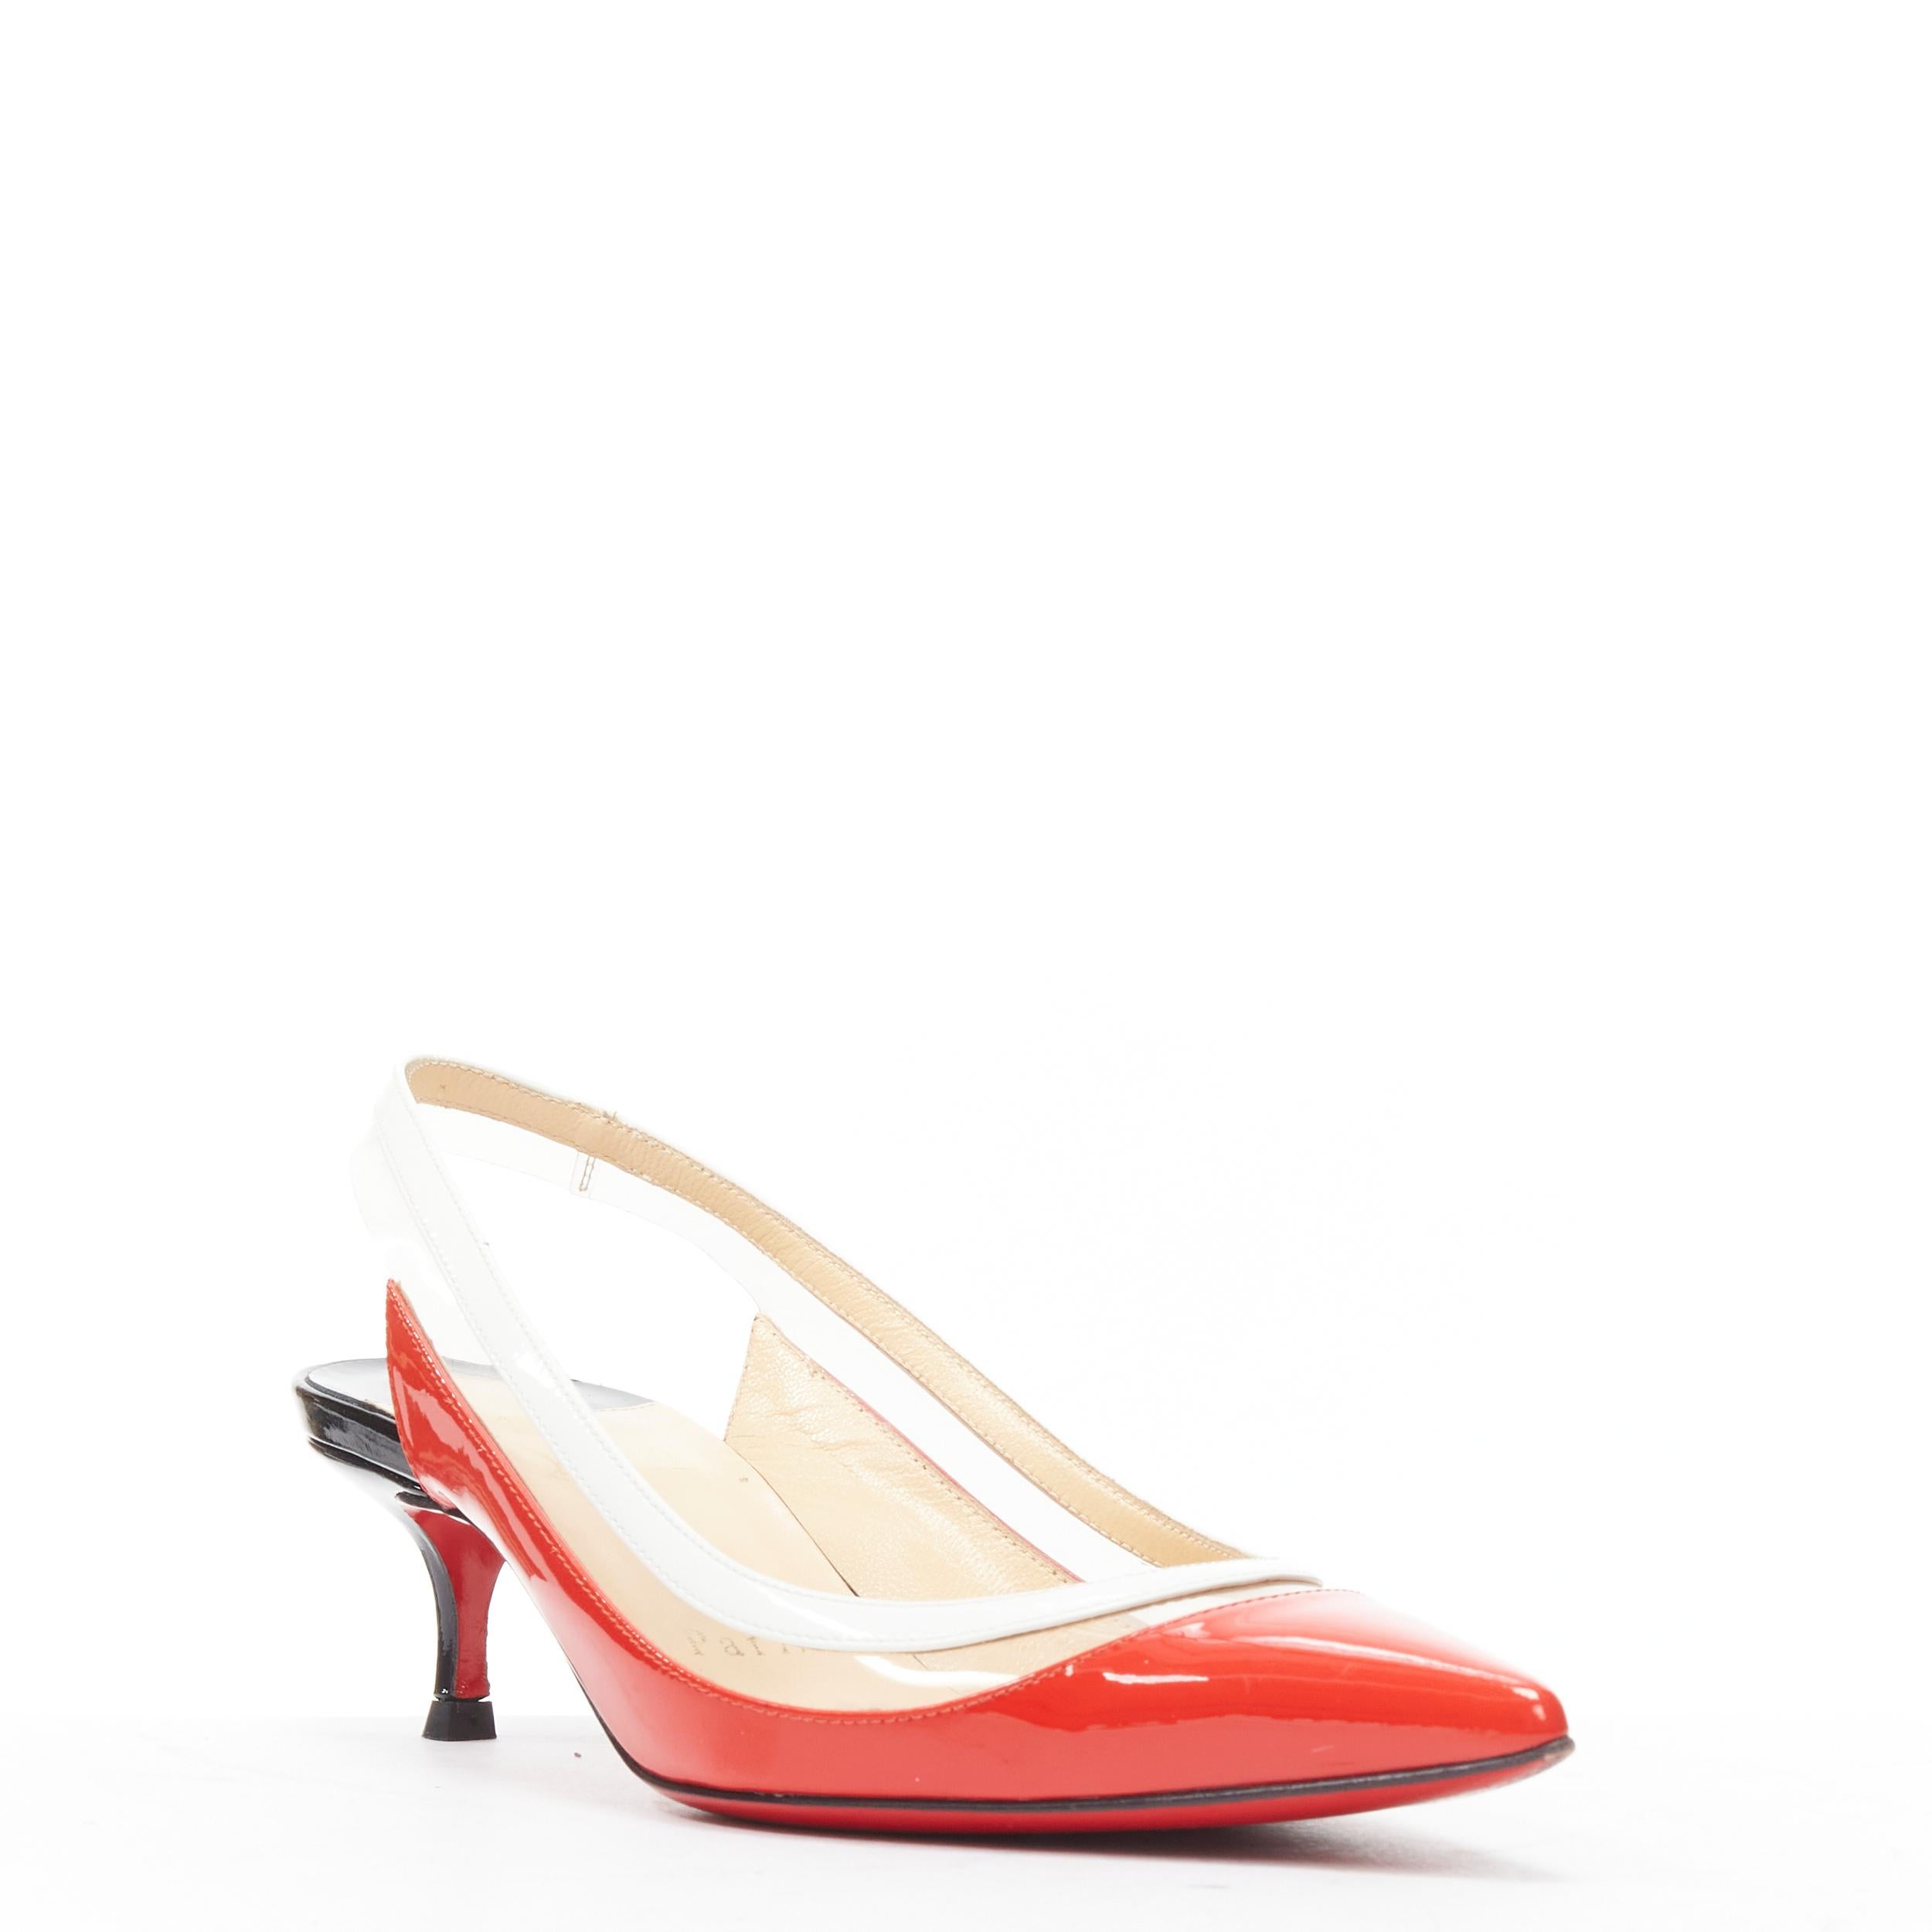 CHRISTIAN LOUBOUTIN Paulina red patent PVC trim slingback kitten heel EU36 
Reference: TGAS/B01715 
Brand: Christian Louboutin 
Model: Paulina 
Material: Patent 
Color: Red 
Pattern: Solid 
Closure: Slingback
Extra Detail: Paulina. Red patent